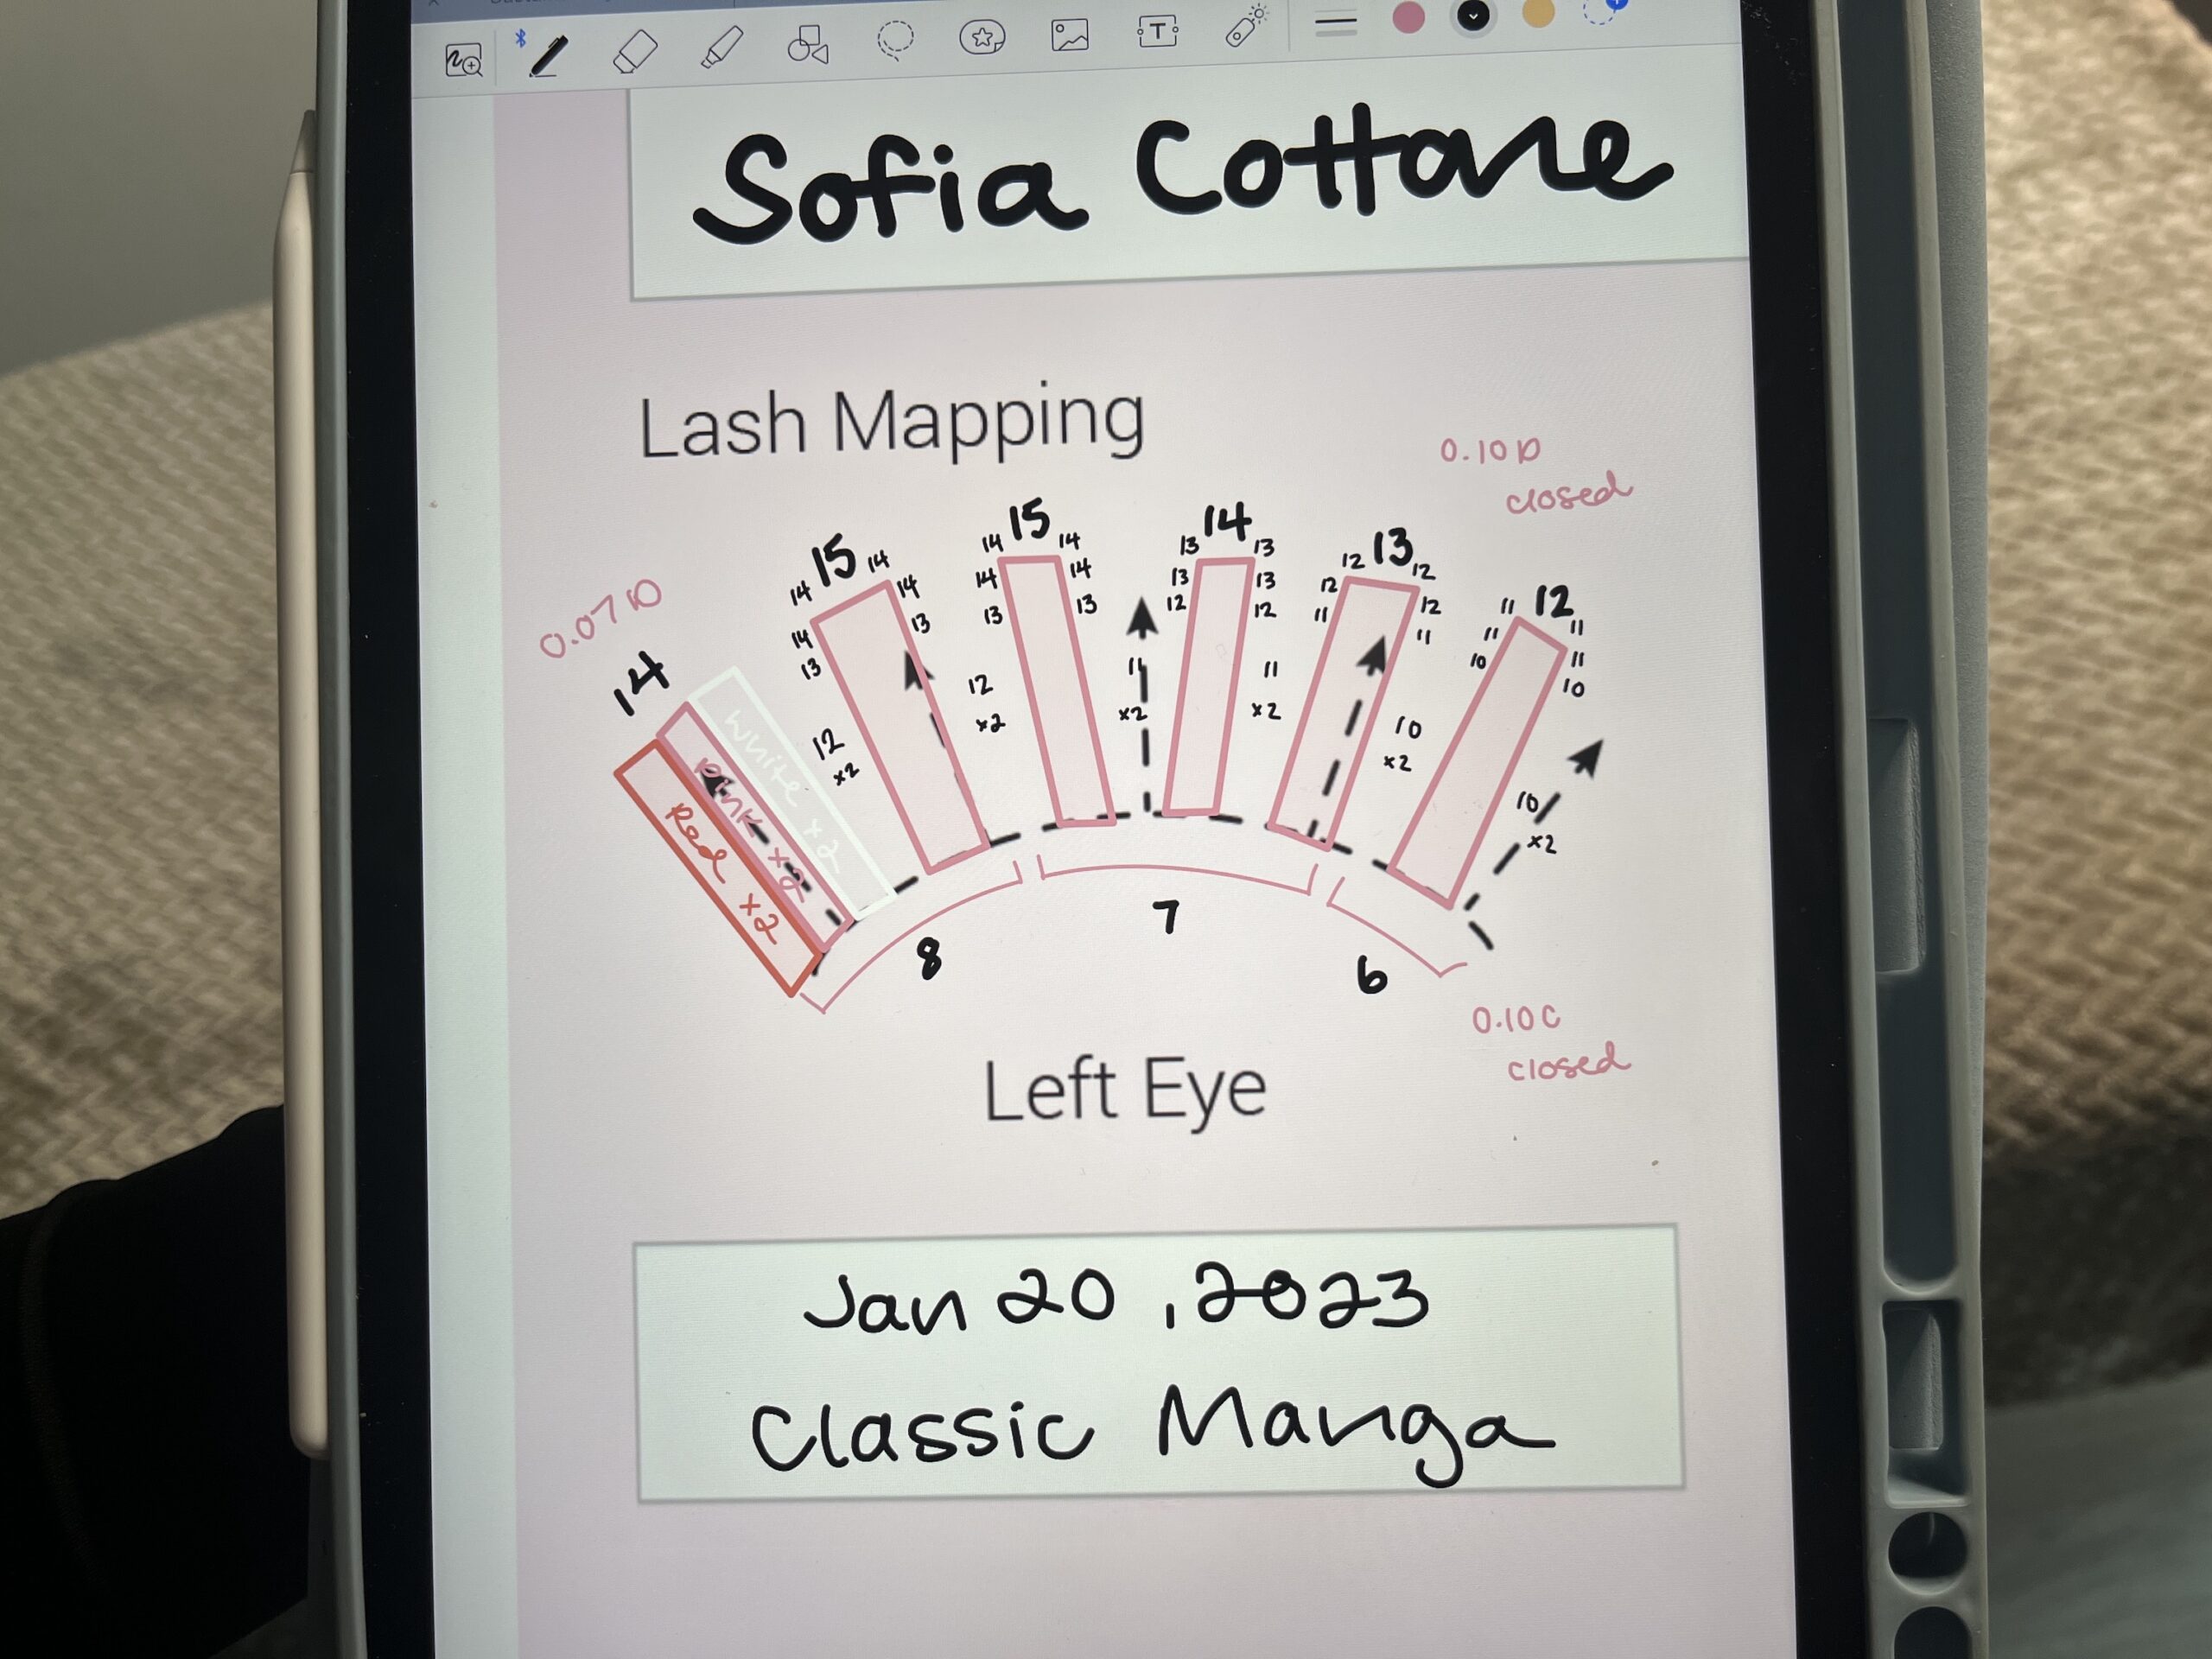 An iPad with a map/diagram of an eyelash extension application